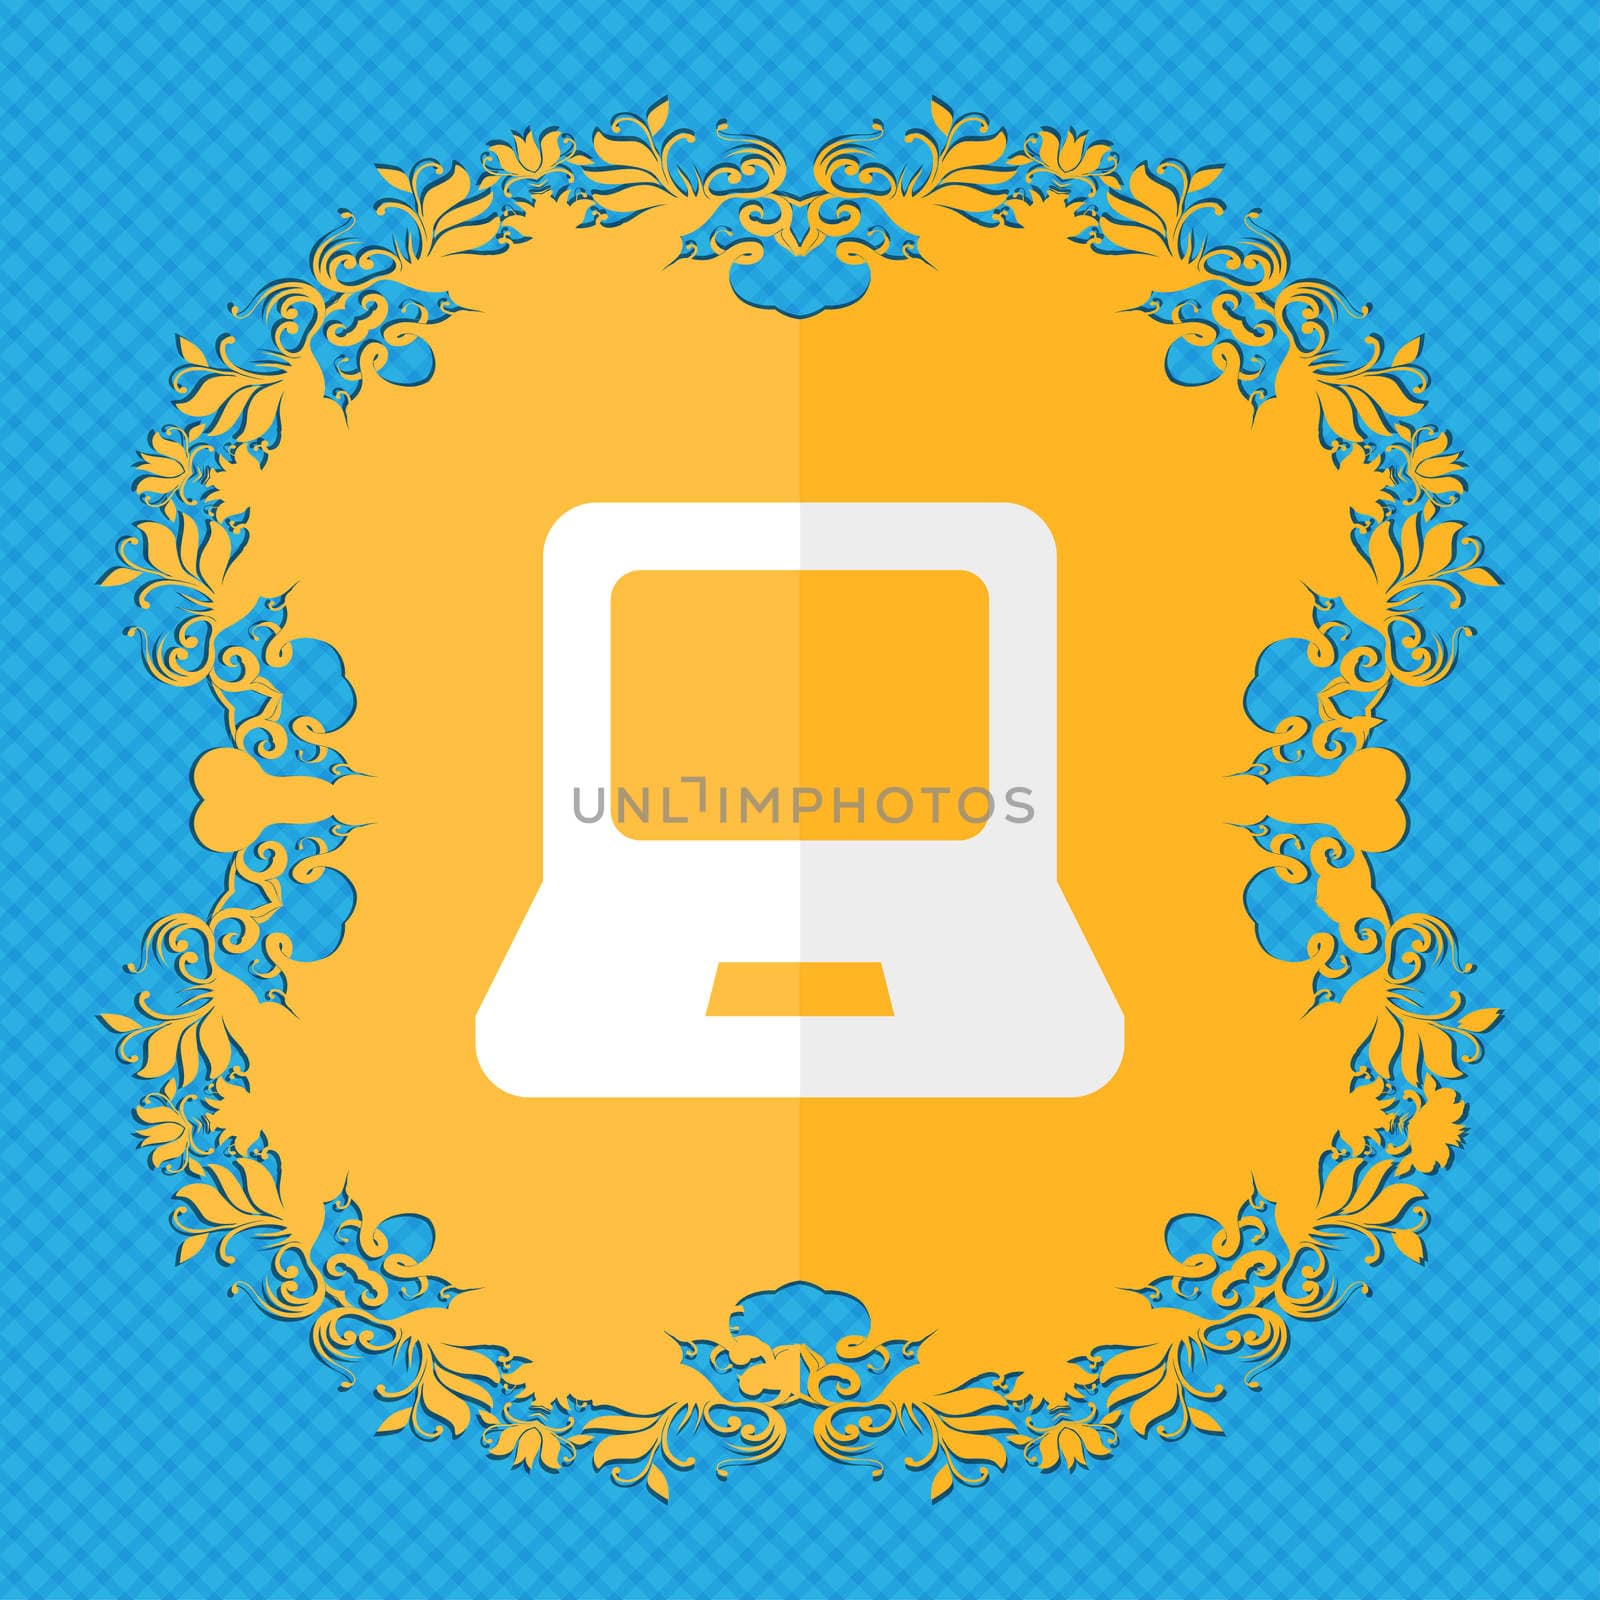 Laptop. Floral flat design on a blue abstract background with place for your text. illustration